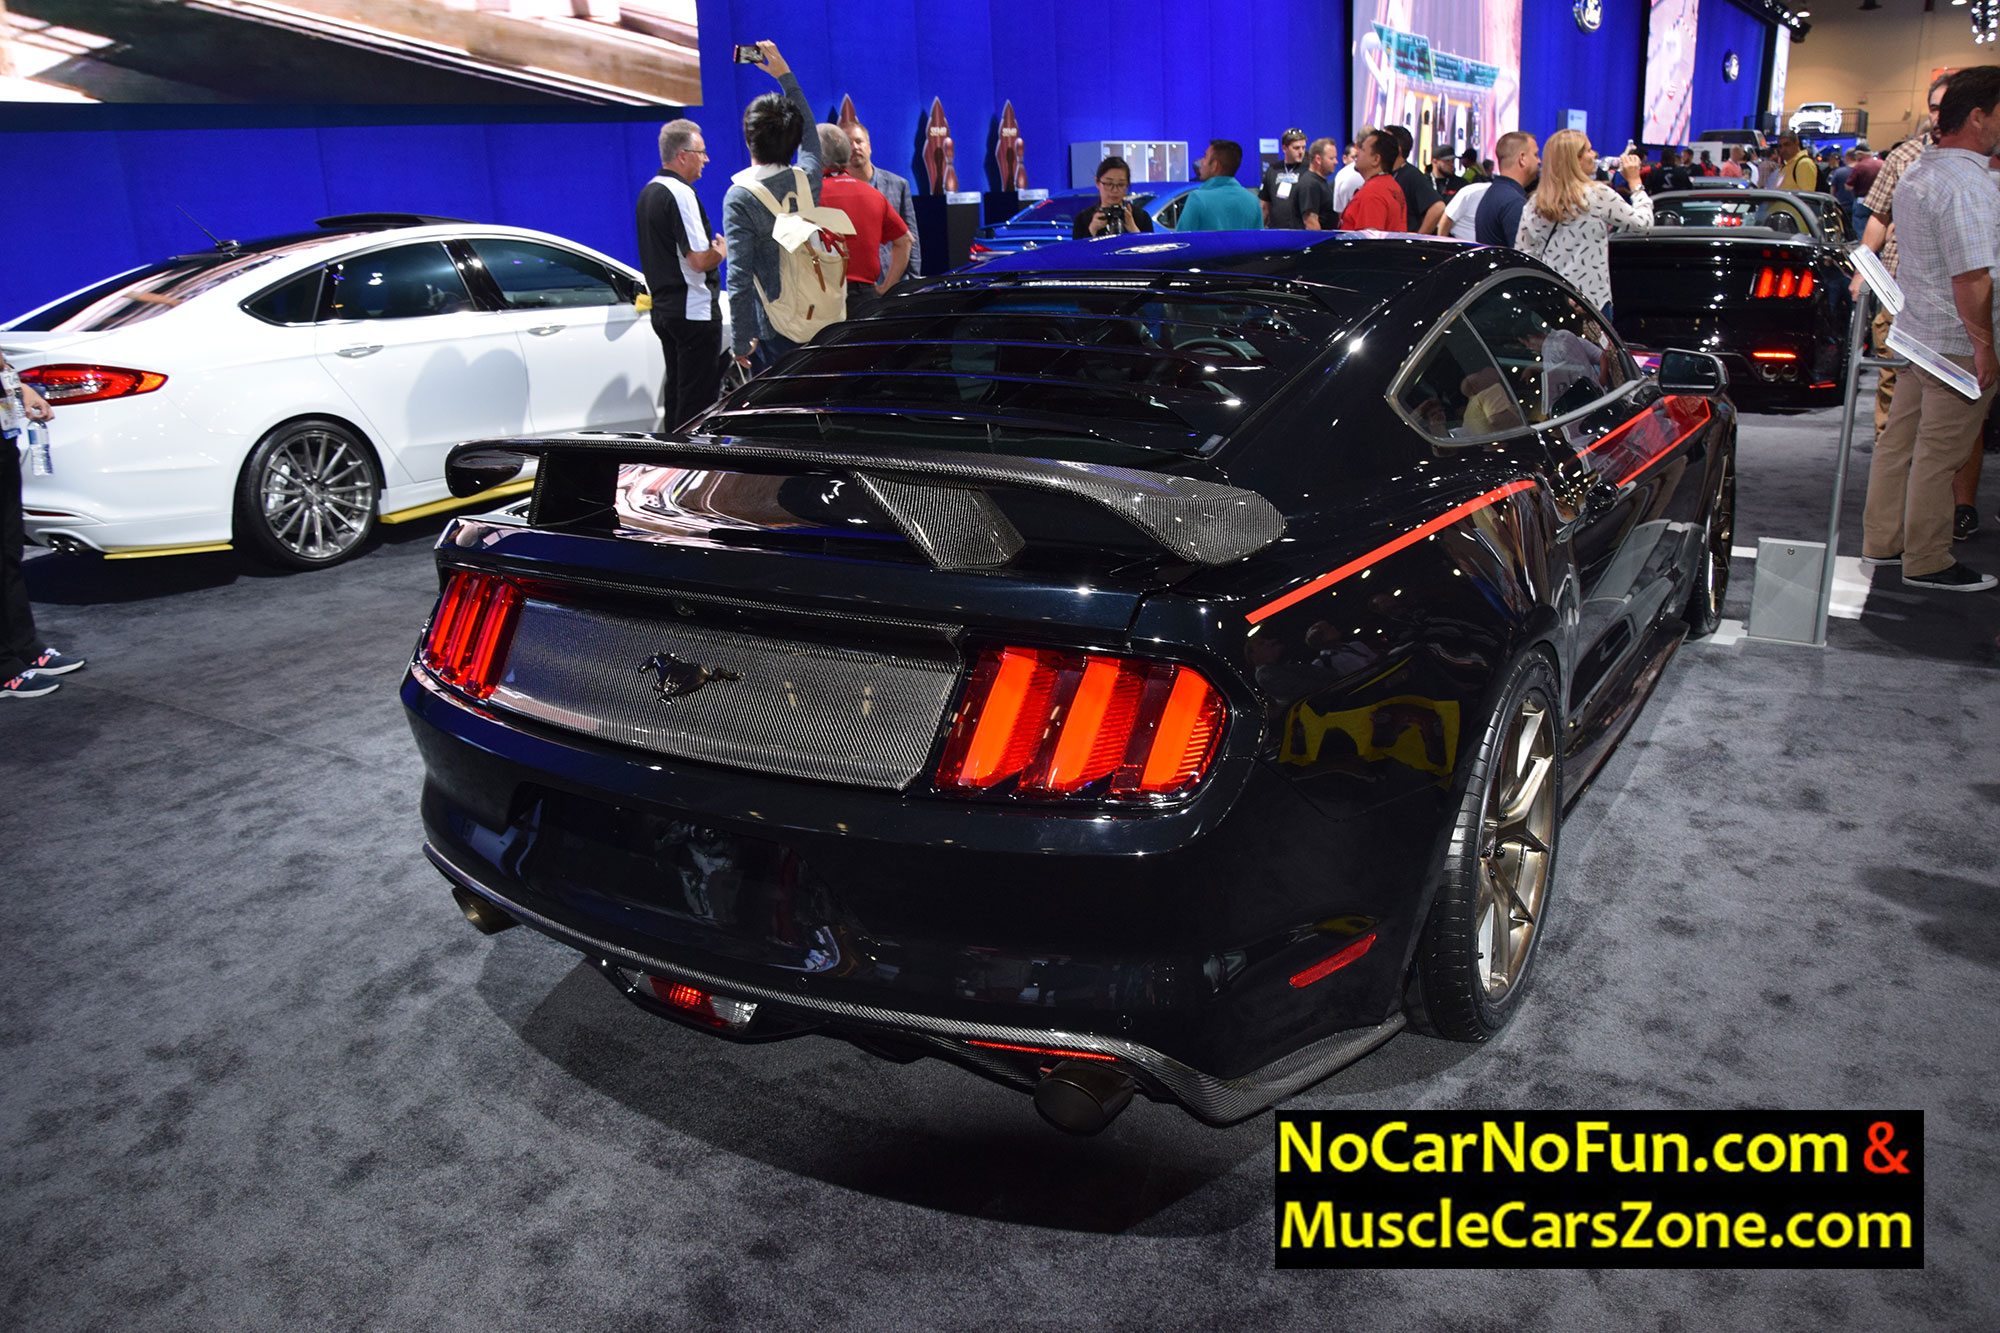 2017 Ford Mustang Fastback red black built by MRT 4 - SEMA SHOW 2016 Vegas